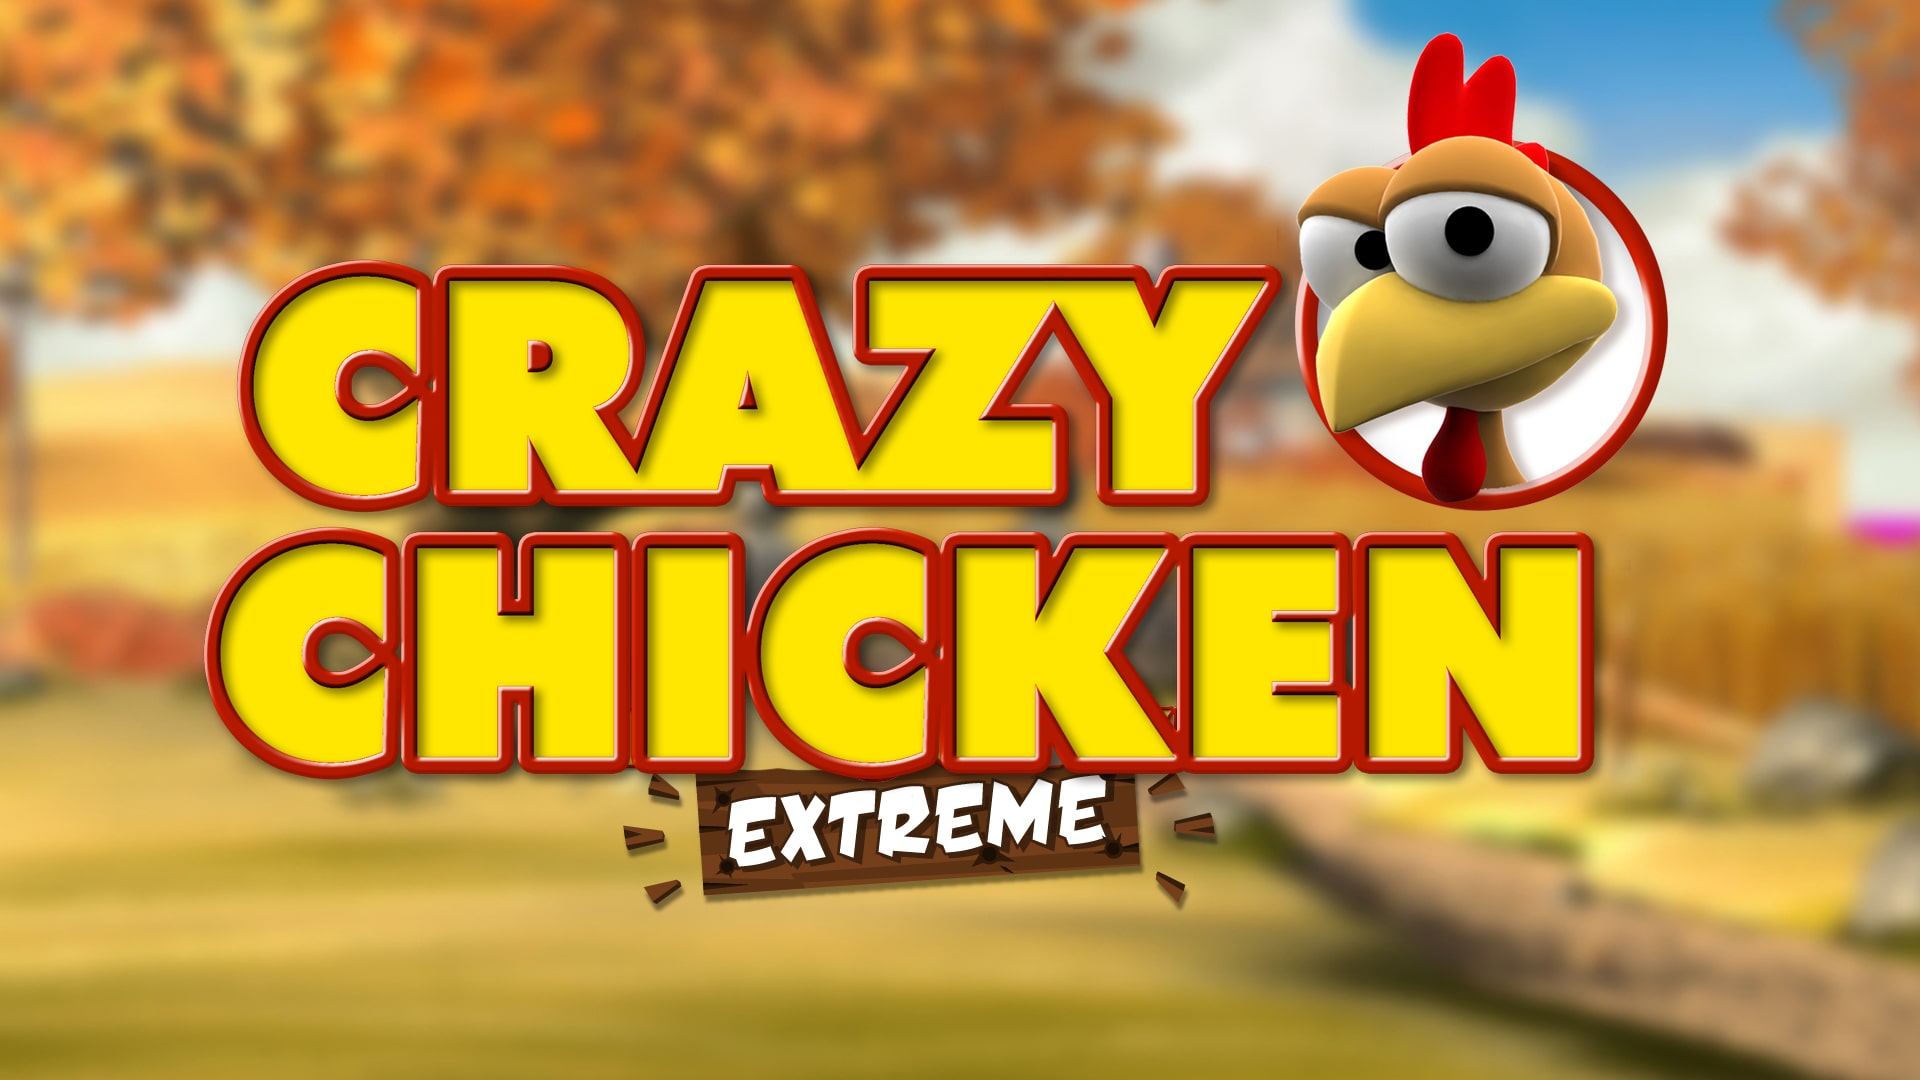 Play Crazy Chicken Extreme Slots